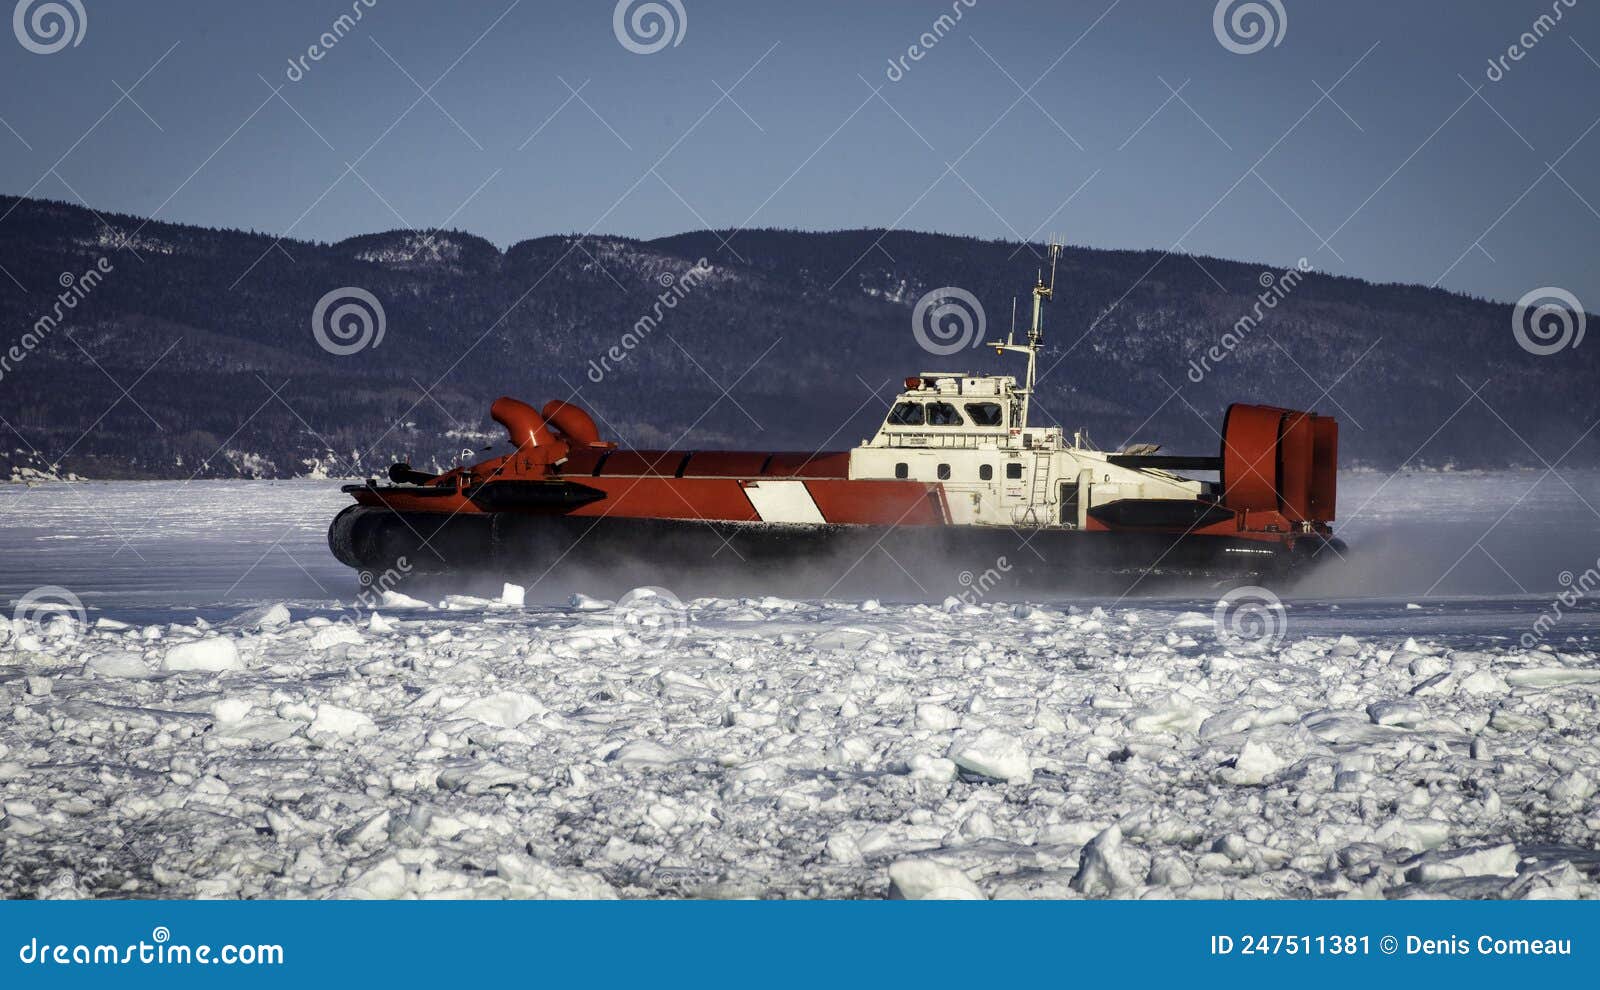 coast guard hovercraft breaking ice near a small community in eastern quebec, canada.